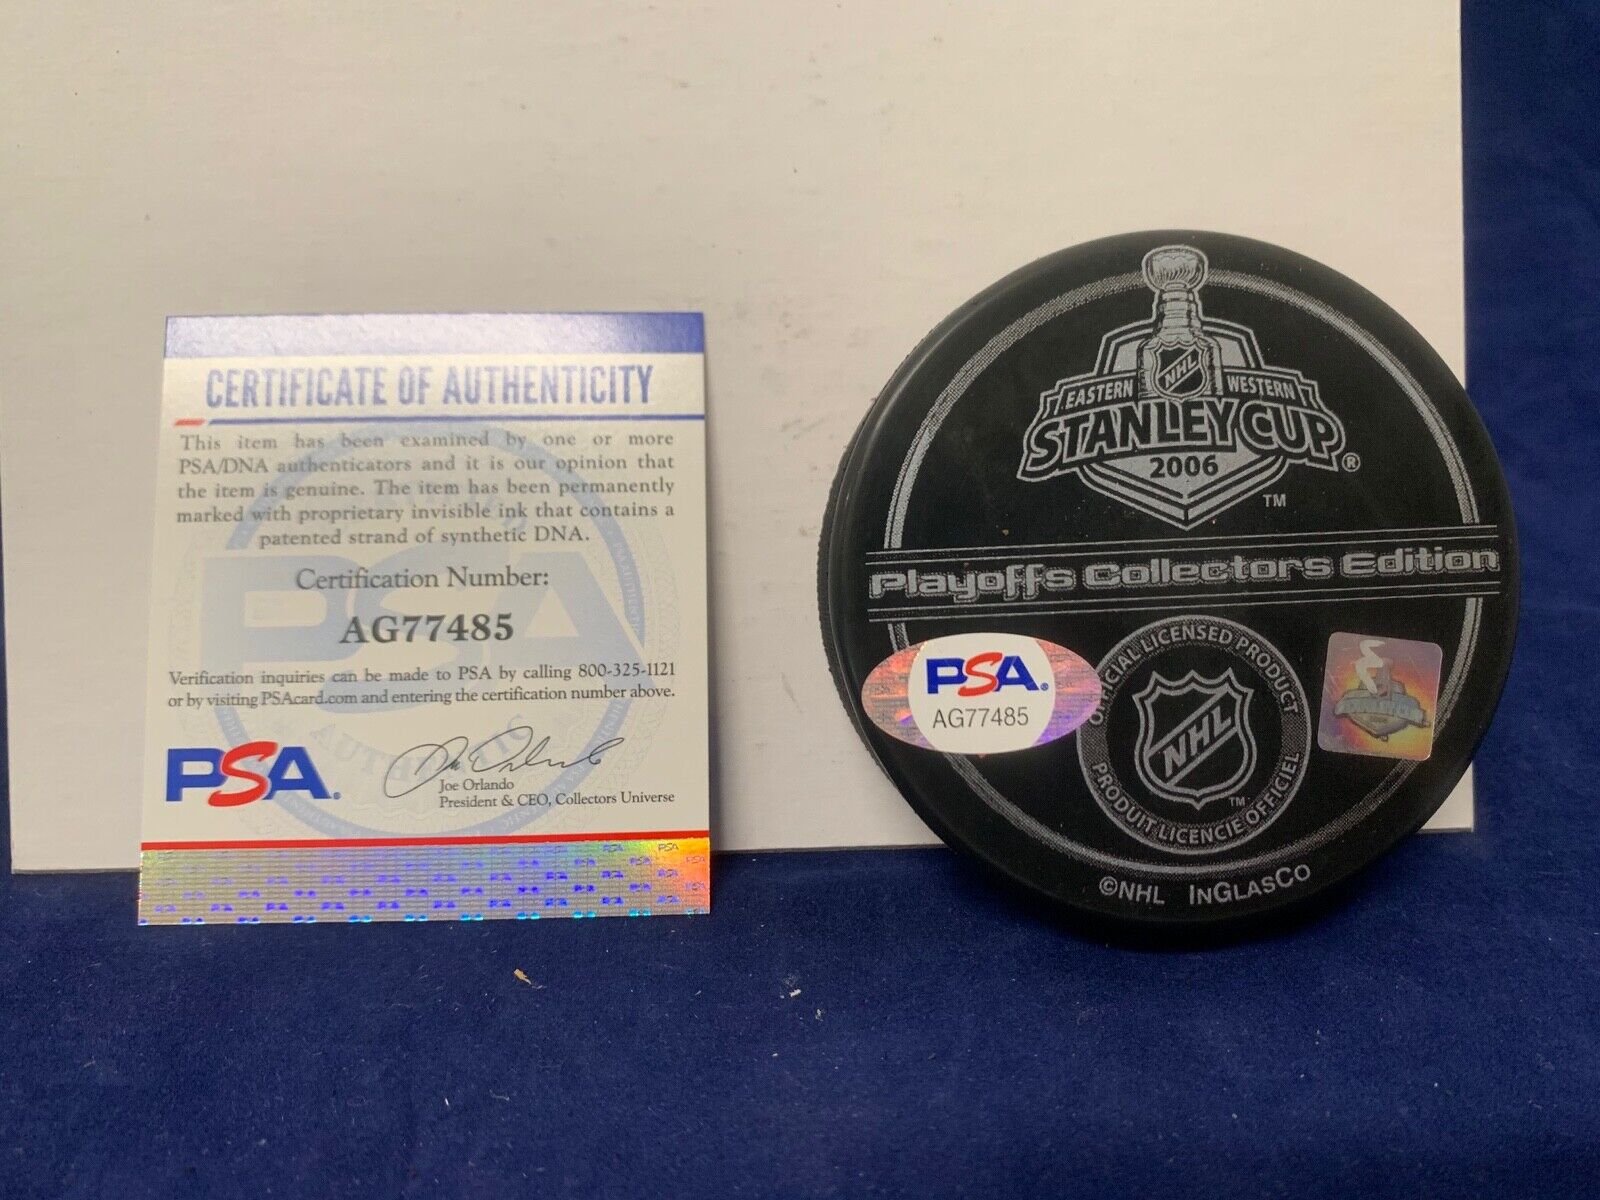 Rod Bindamour Autographed Signed 2006 Stanley Cup Edition Puck B with PSA COA